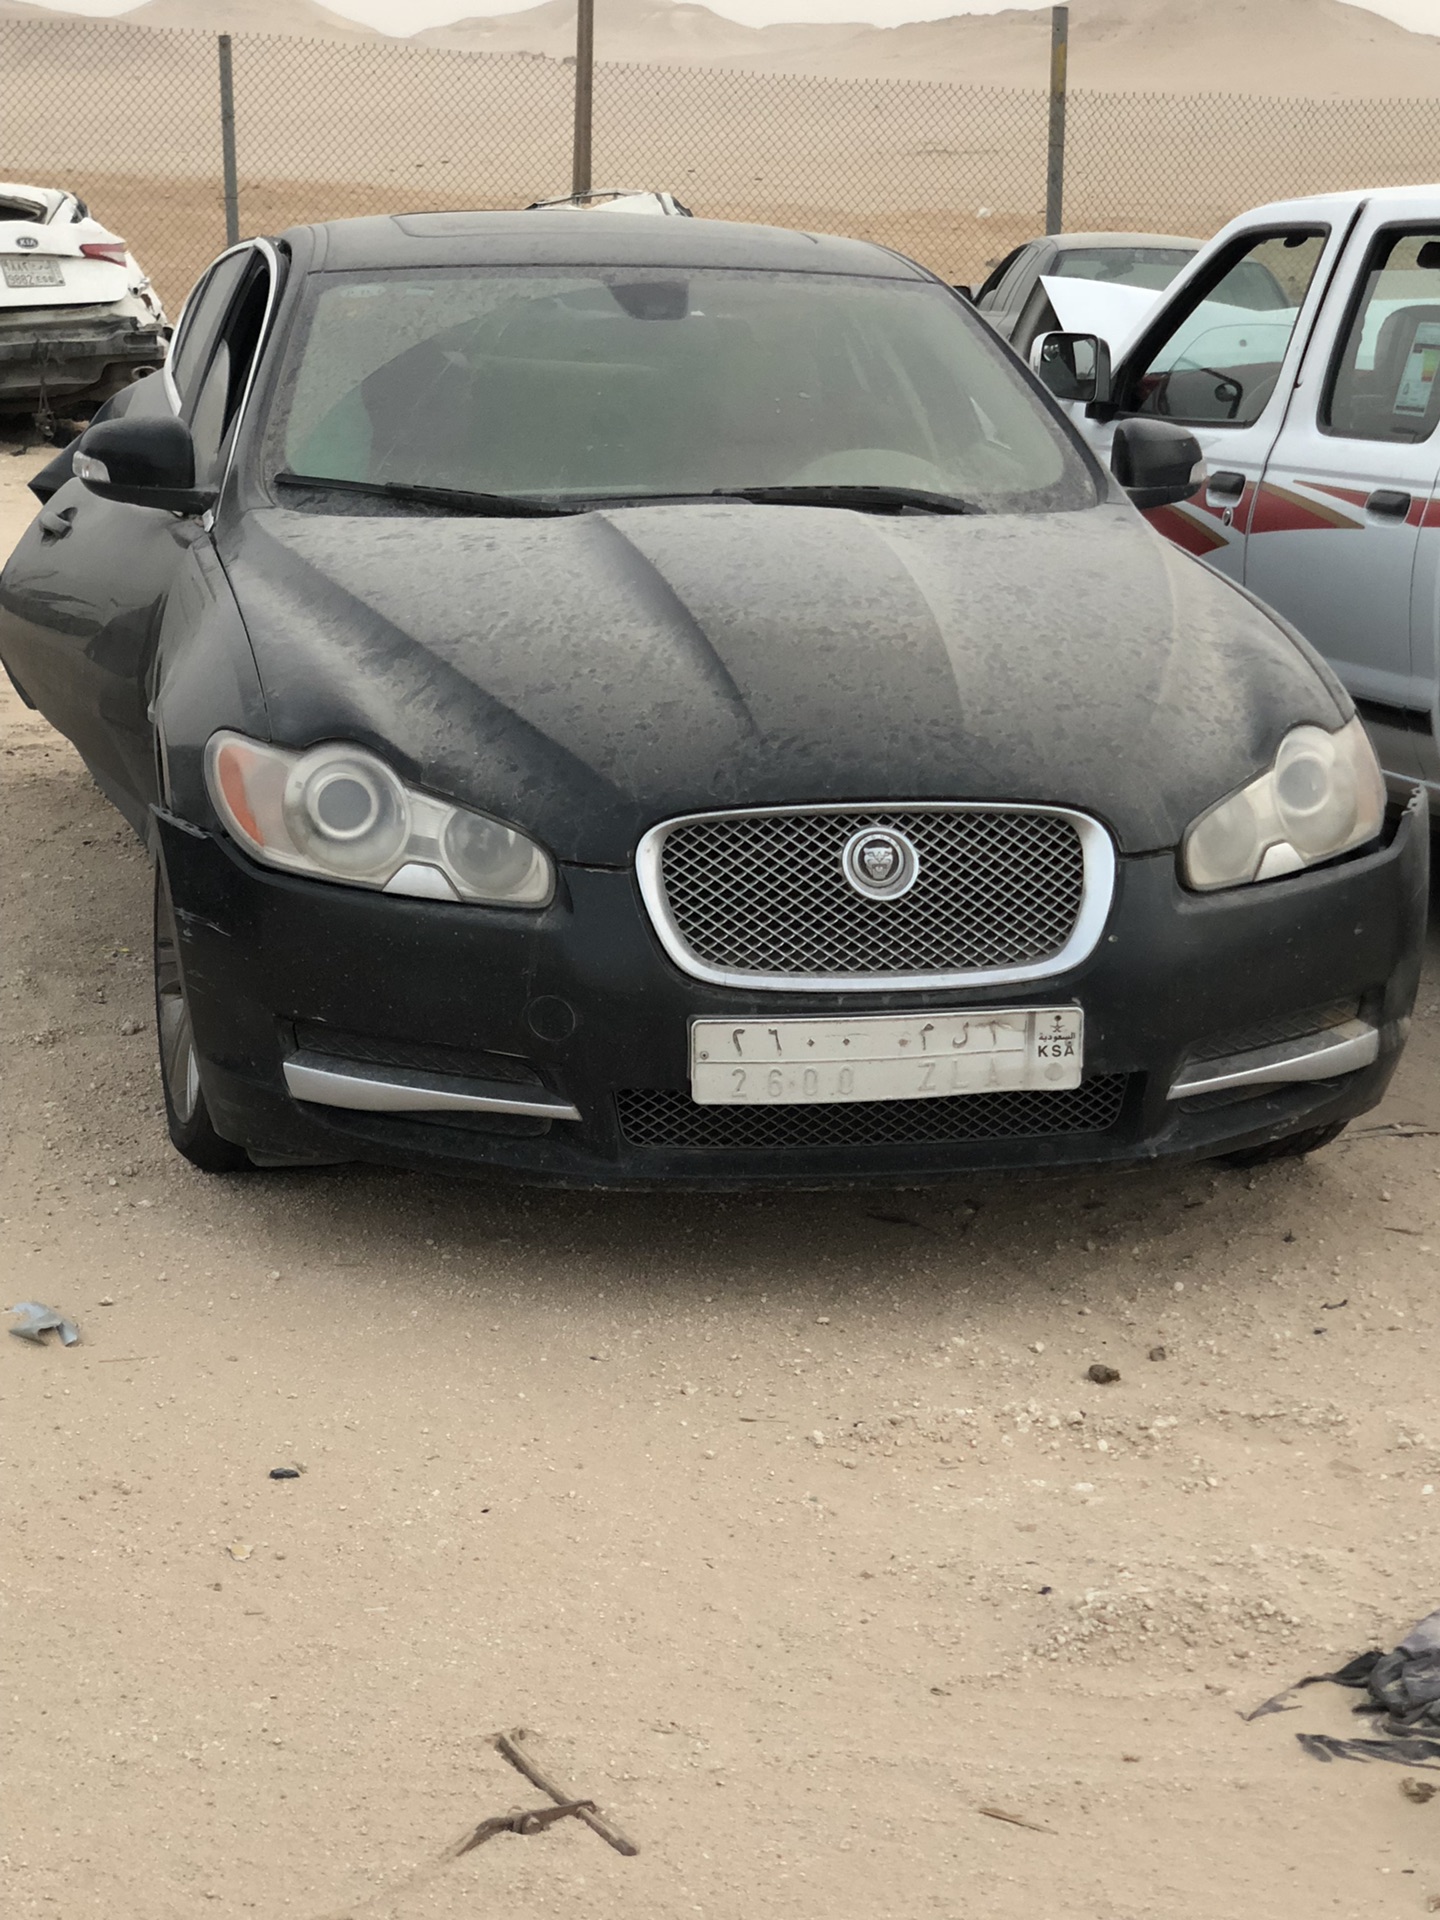 2020 Toyota Supra 3.0 Premium for sale in good and perfect working condition, no accident, no mechanical issues, very clean in and out, interested buyer should -  جاكوار 2009 لا تنسَ أنك...